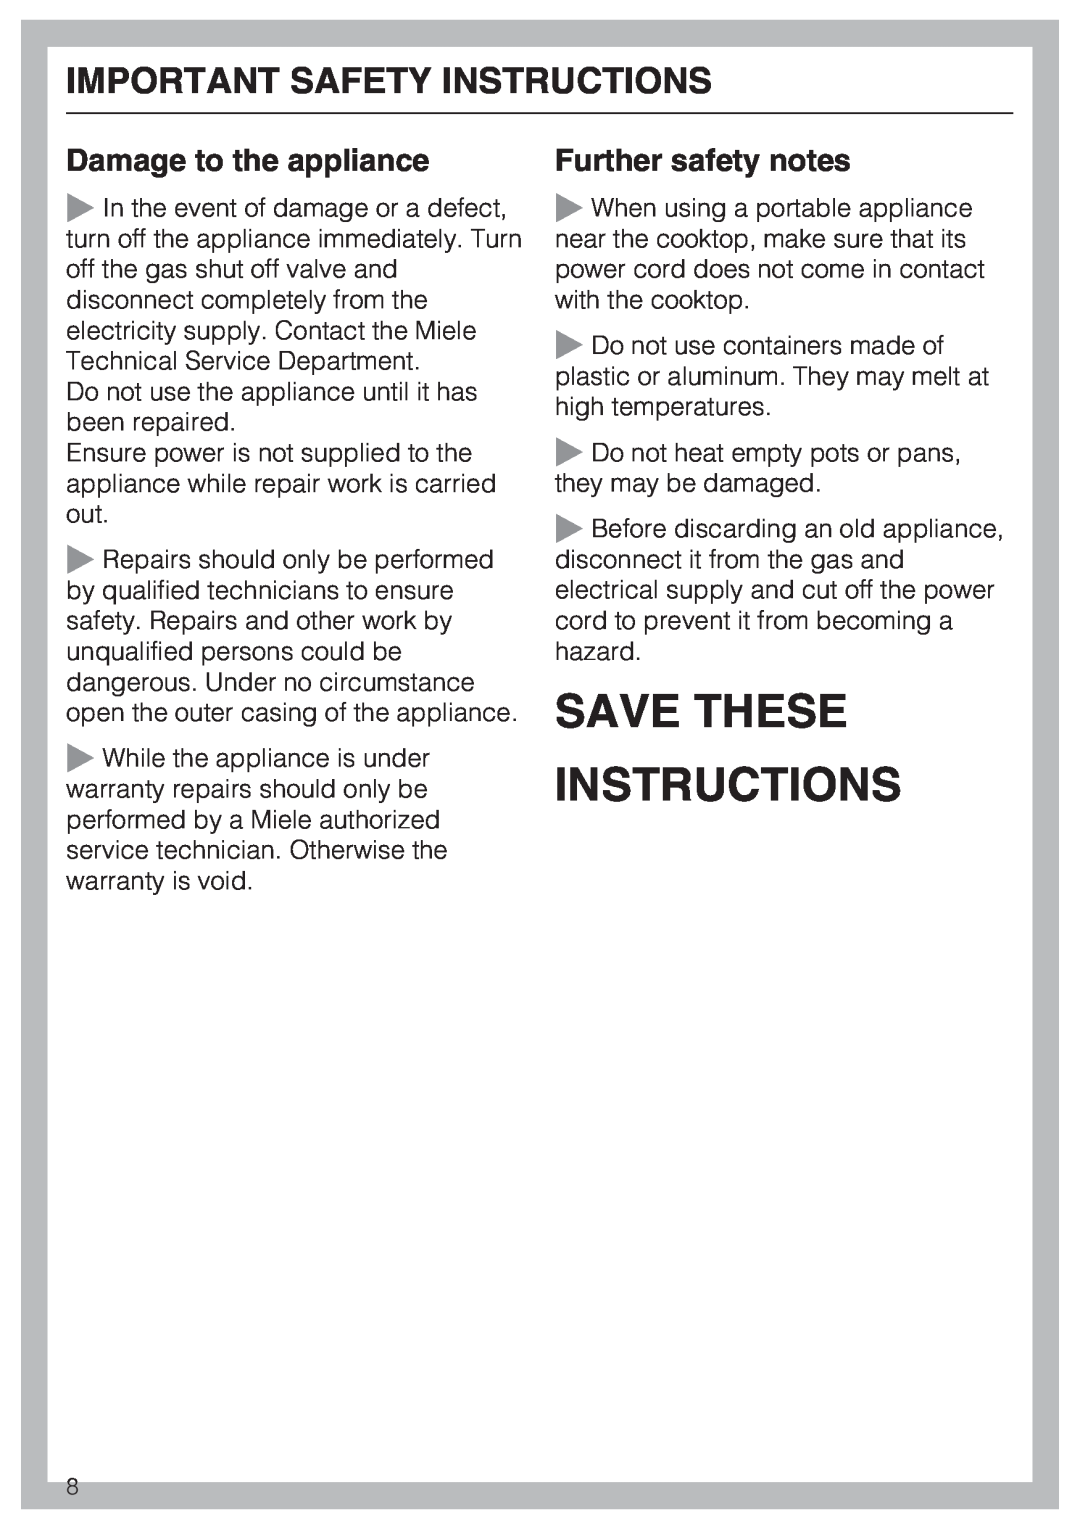 Miele KM 3485 Damage to the appliance, Further safety notes, Save These Instructions, Important Safety Instructions 